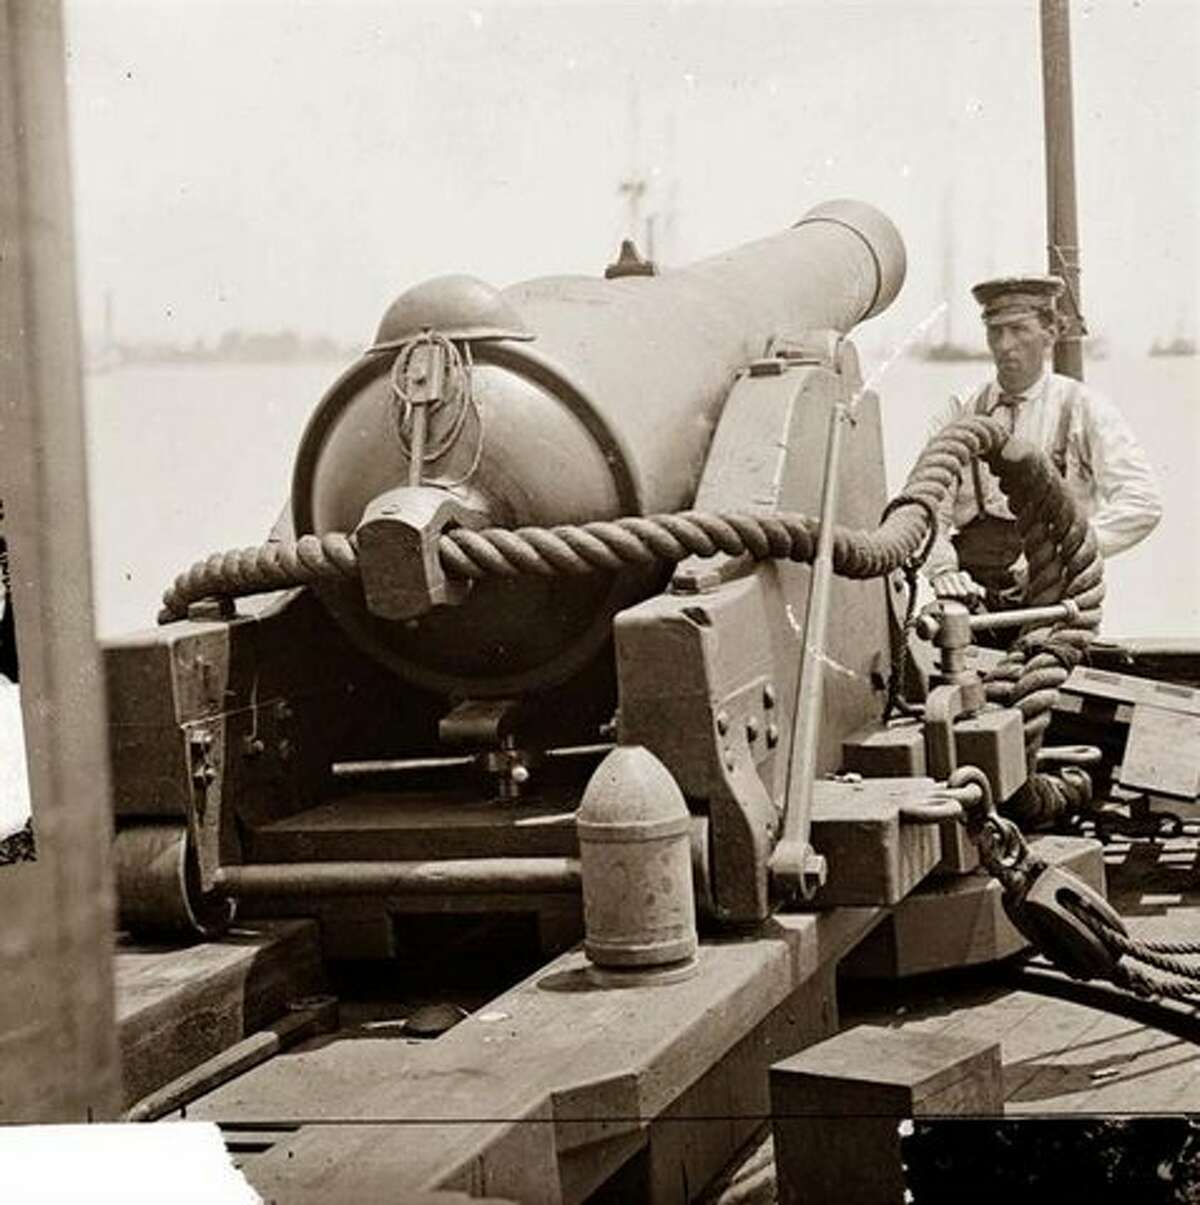 An example of a Civil War era rifle cannon and rigging. An eye hook can be seen in the foreground at right, attached to a line. Eye hooks were used to position the cannon in place prior to firing. Courtesy photo